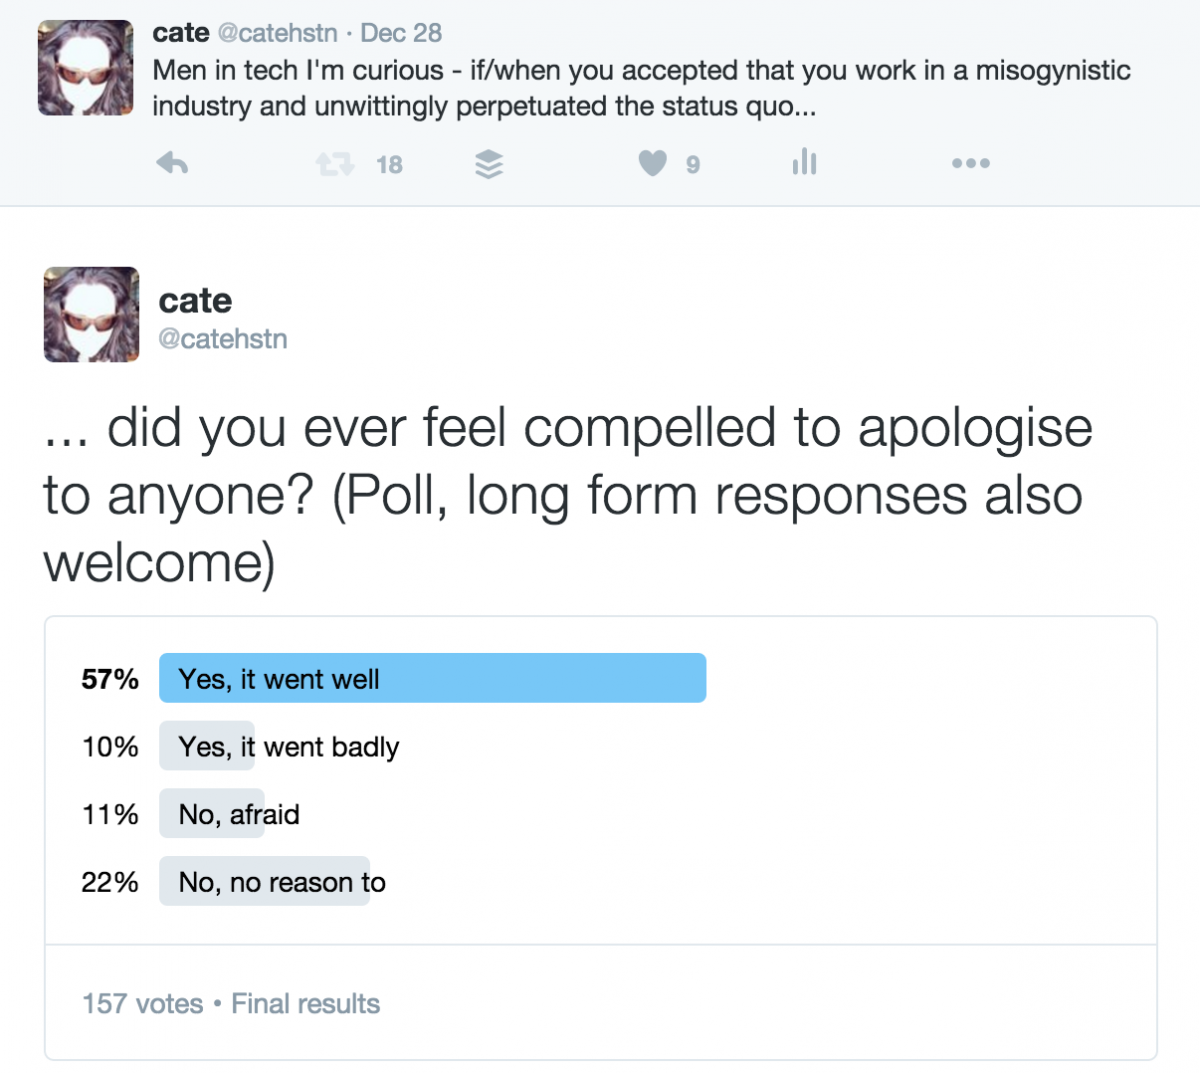 Tweet reads: Men in tech I'm curious - if/when you accepted that you work in a misogynistic industry and unwittingly perpetuated the status quo did you ever feel compelled to apologise to anyone? (Poll, long form responses also welcome) 57% Yes, it went well 10% Yes, it went badly 11% No, afraid 22% No, no reason to